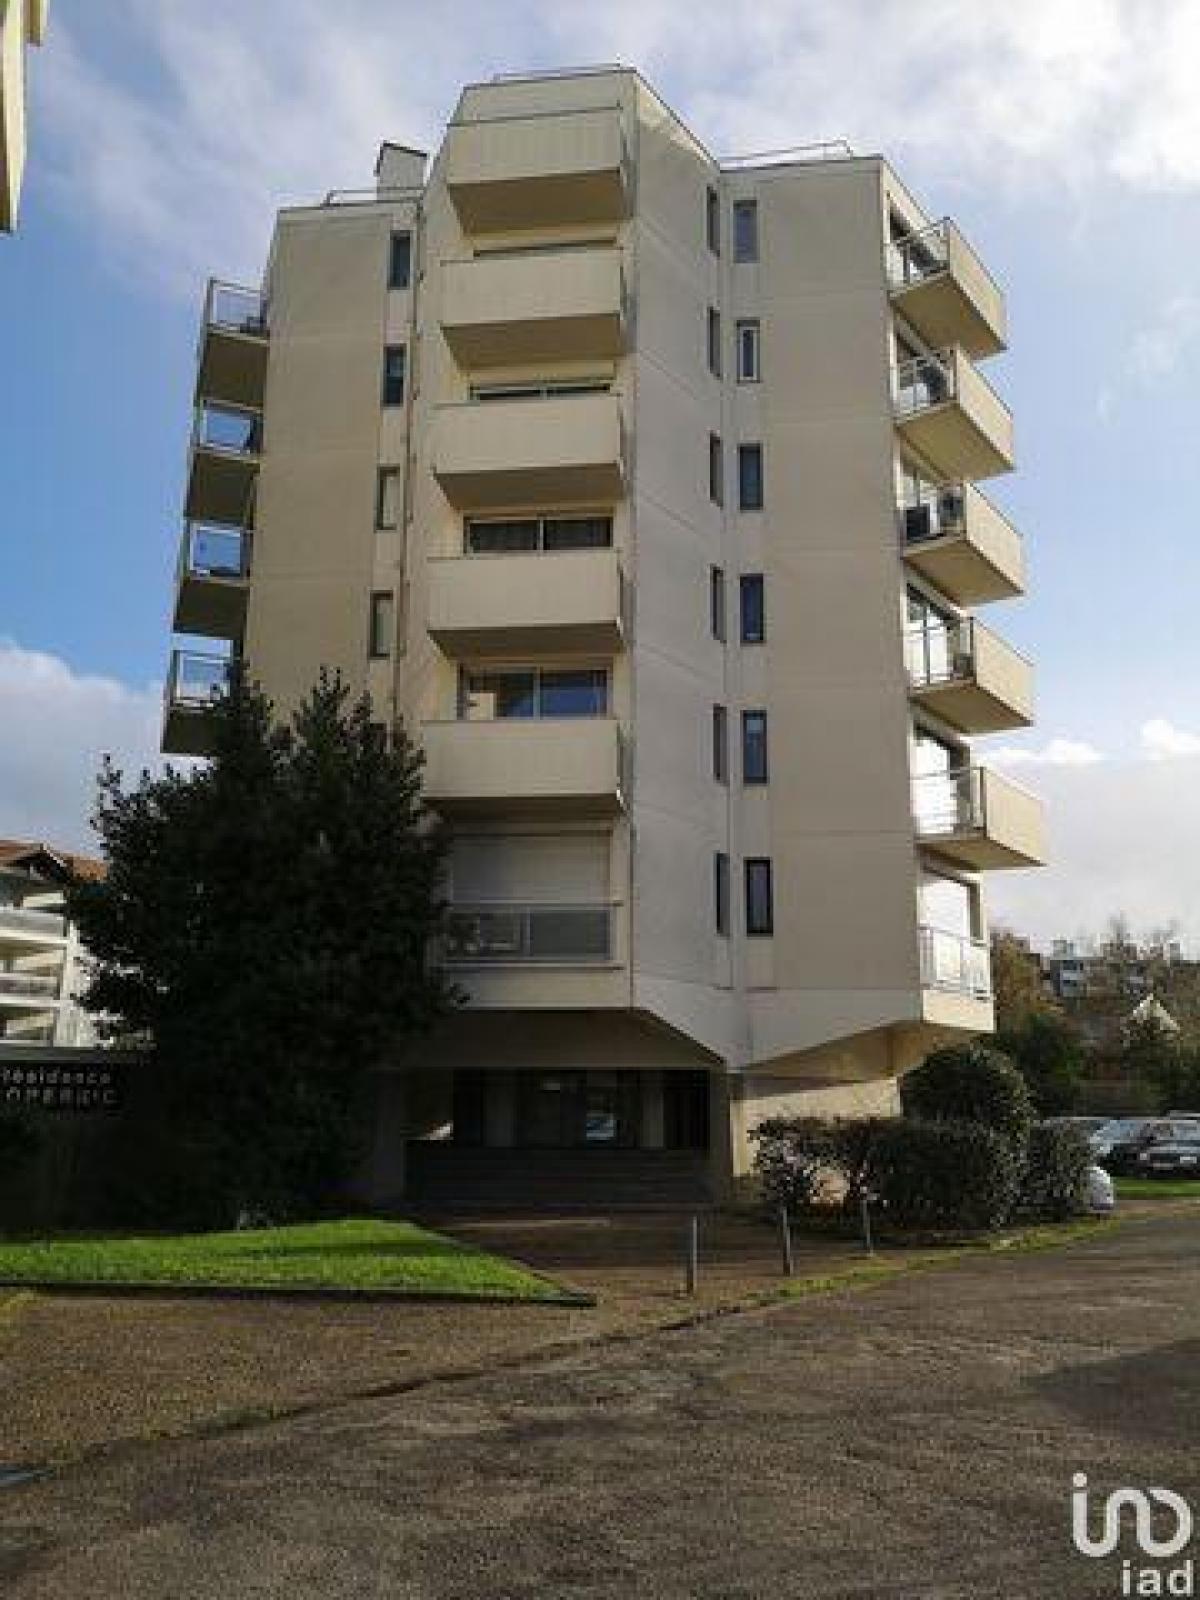 Picture of Apartment For Sale in Pessac, Aquitaine, France